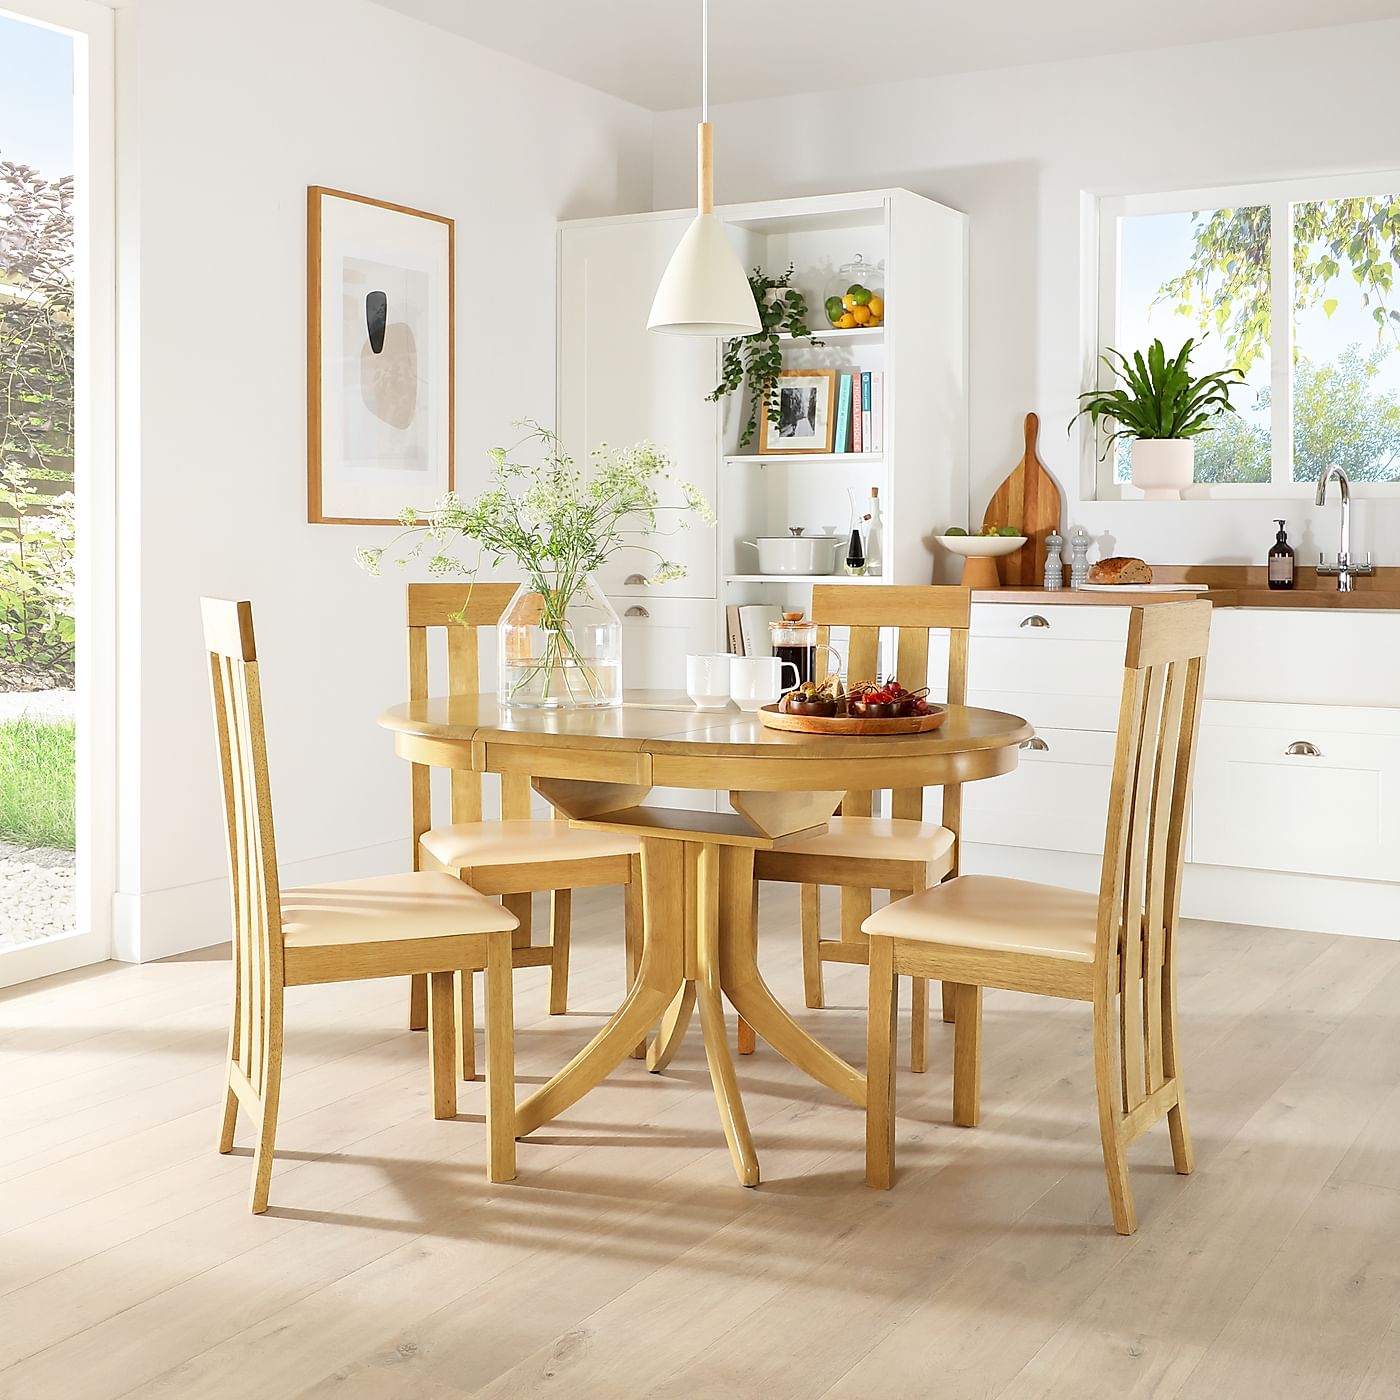 Hudson Round Oak Extending Dining Table with 6 Chester Chairs (Ivory